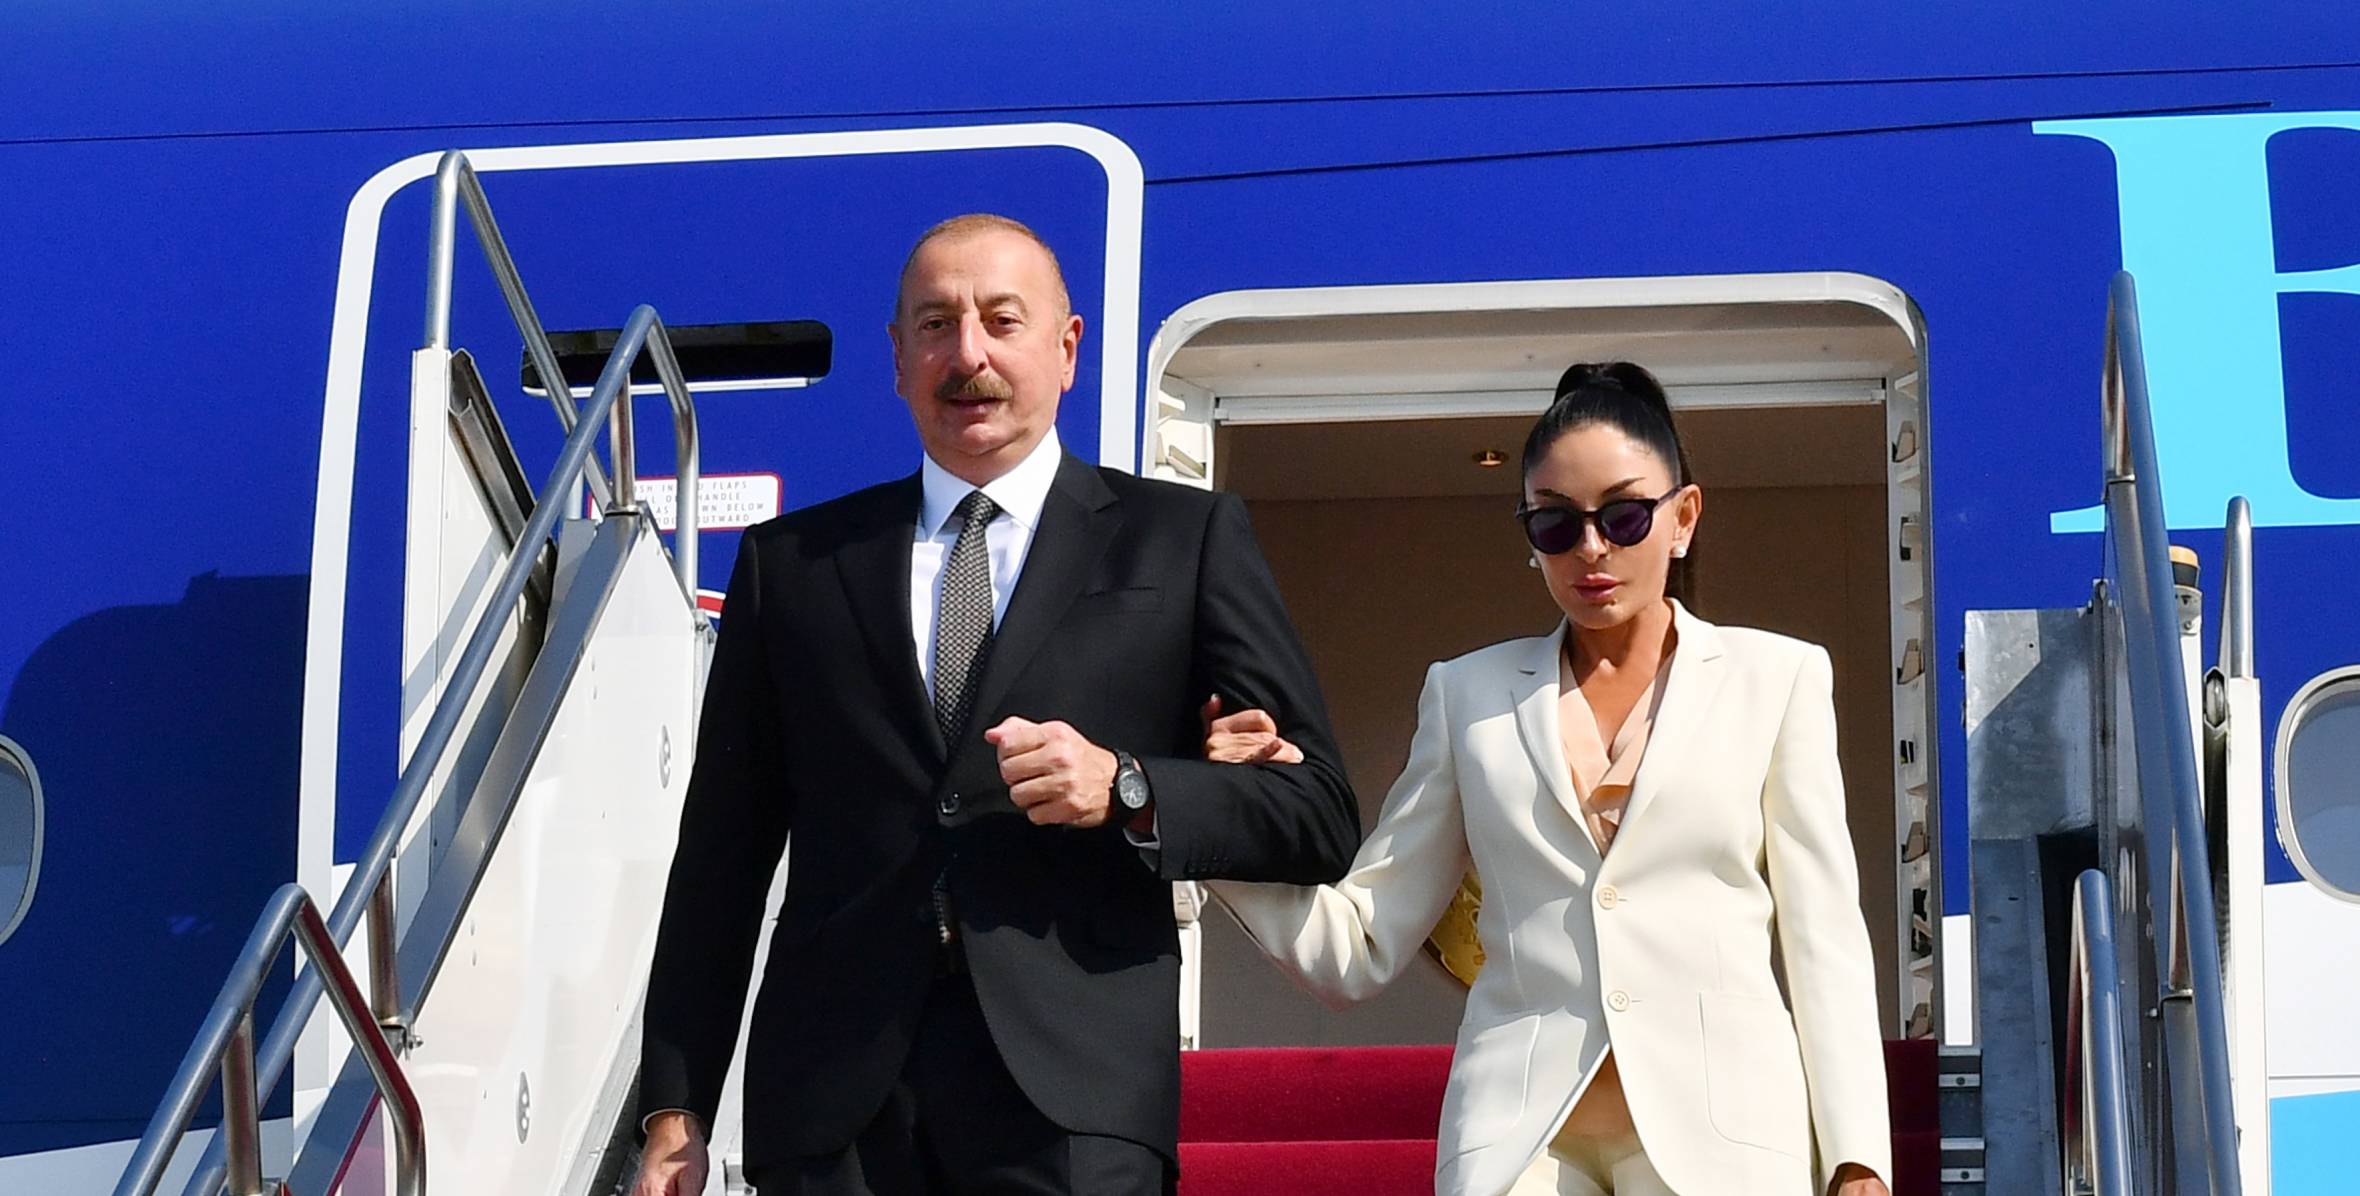 Ilham Aliyev arrived in Hungary for working visit